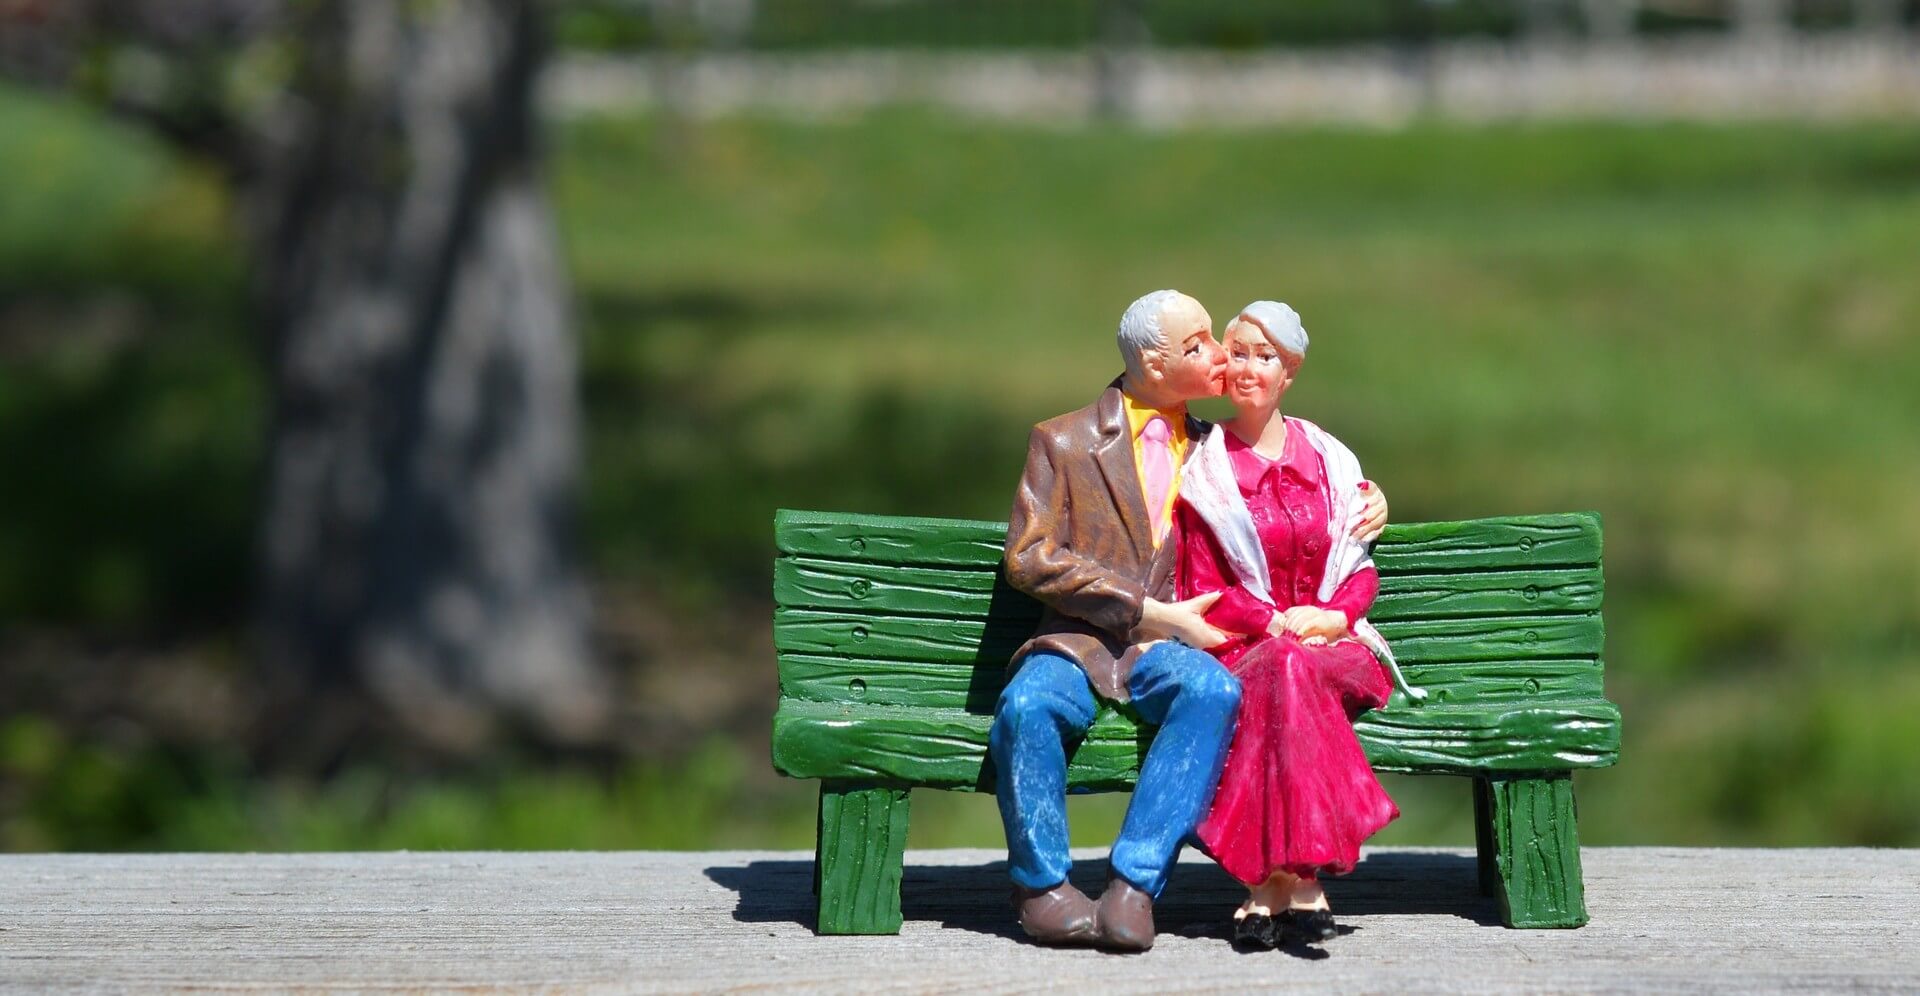 The old couple sitting on the bench